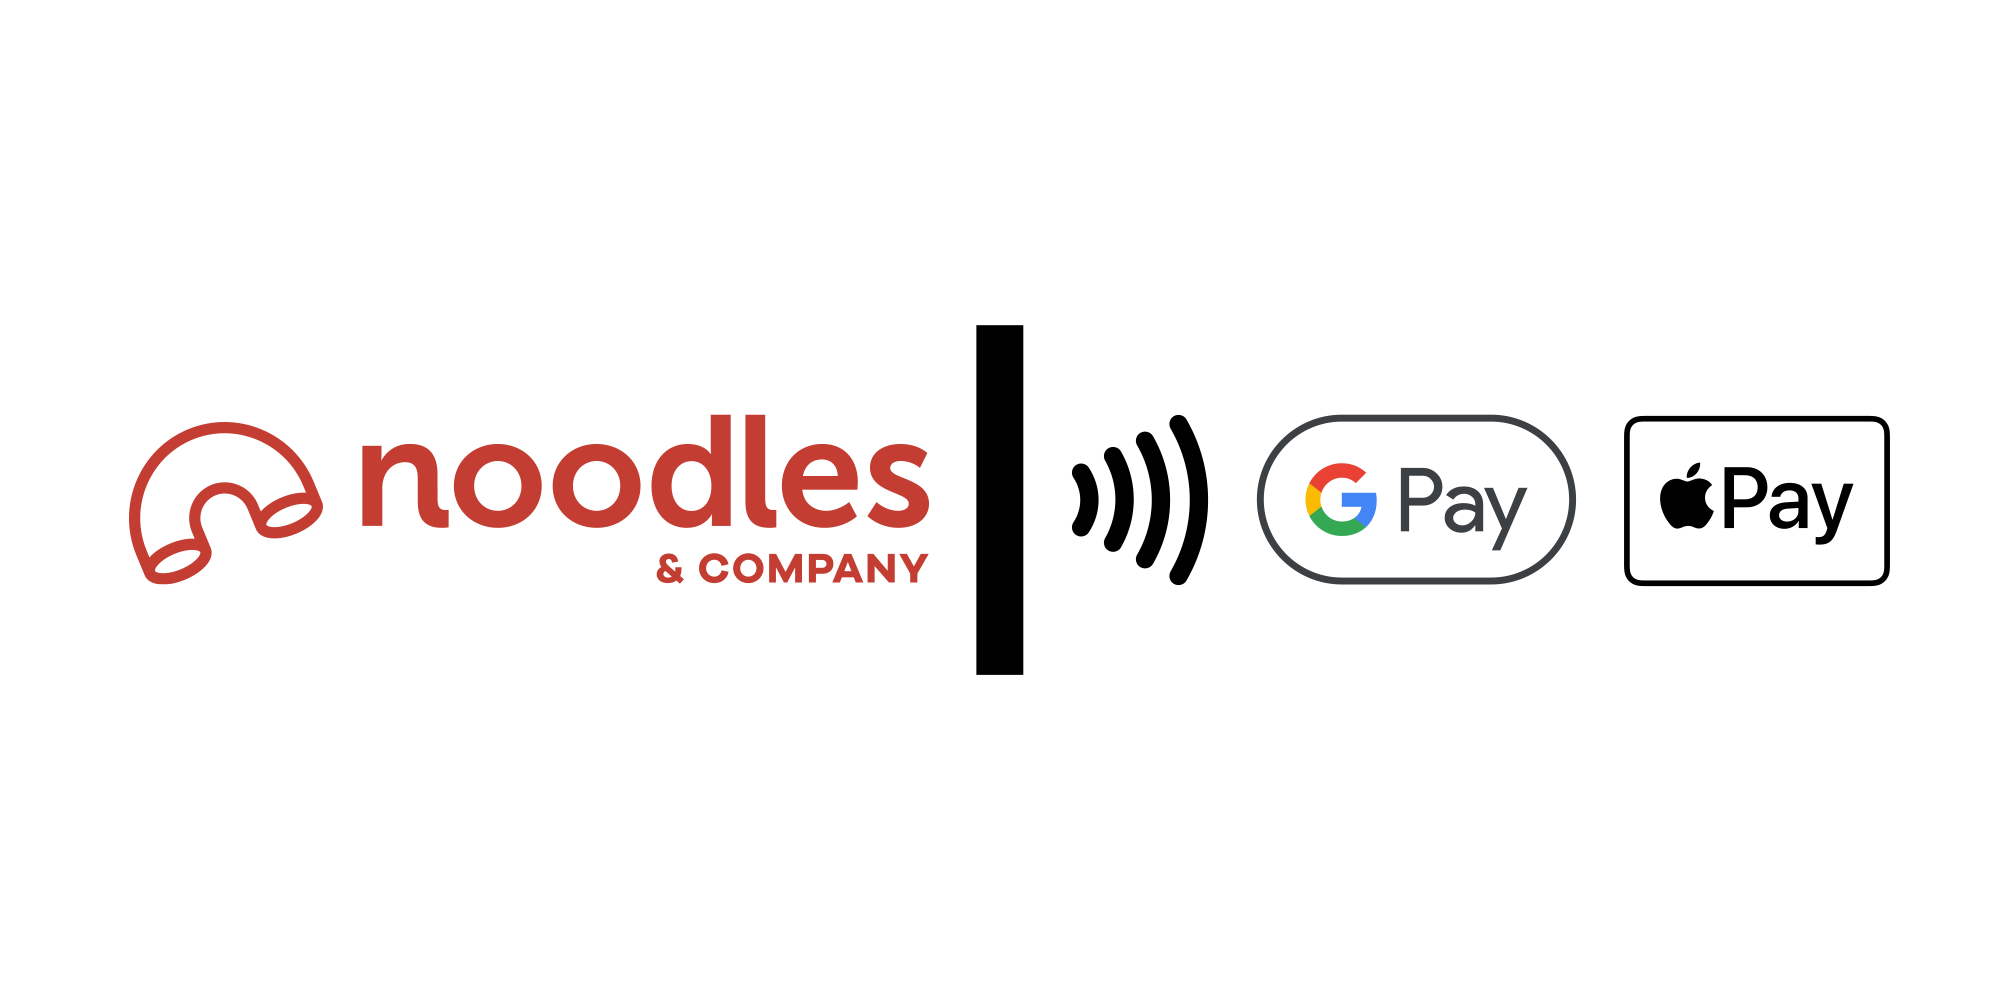 Noodles & Company accepts contactless payments, as well as Apple Pay online/in-app.